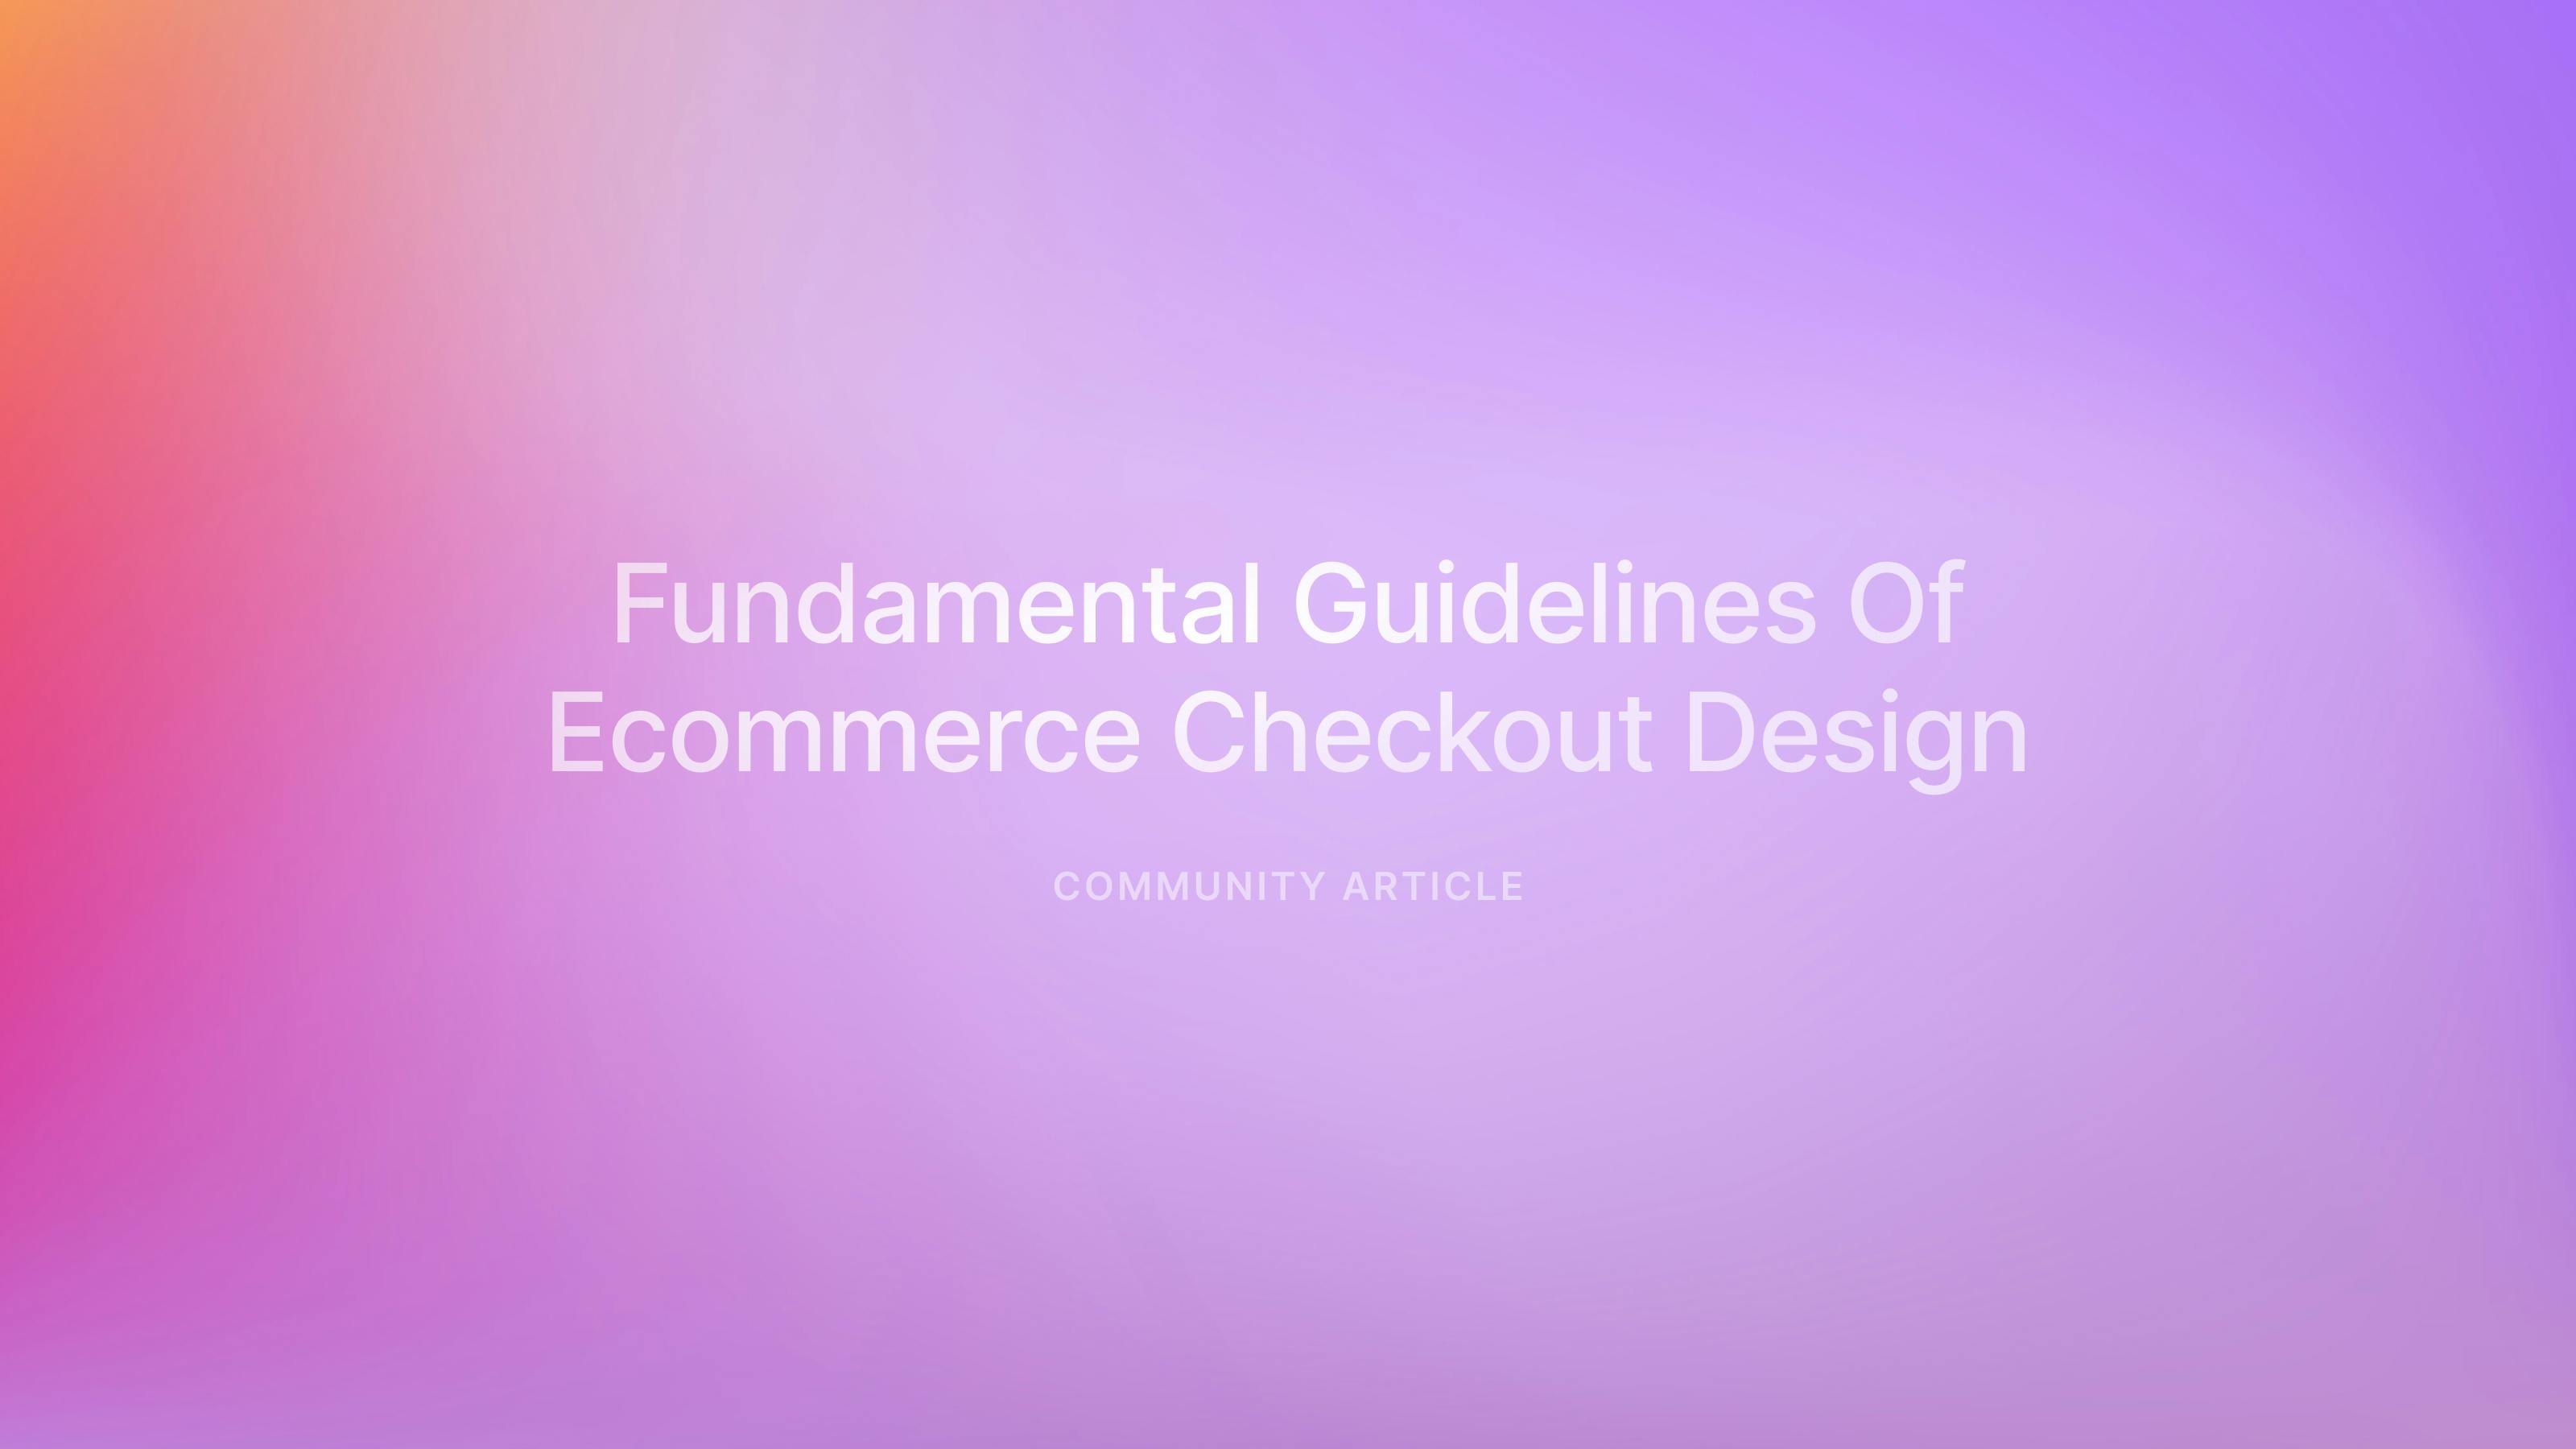 Best Practices for Ecommerce Checkout Design for your Business